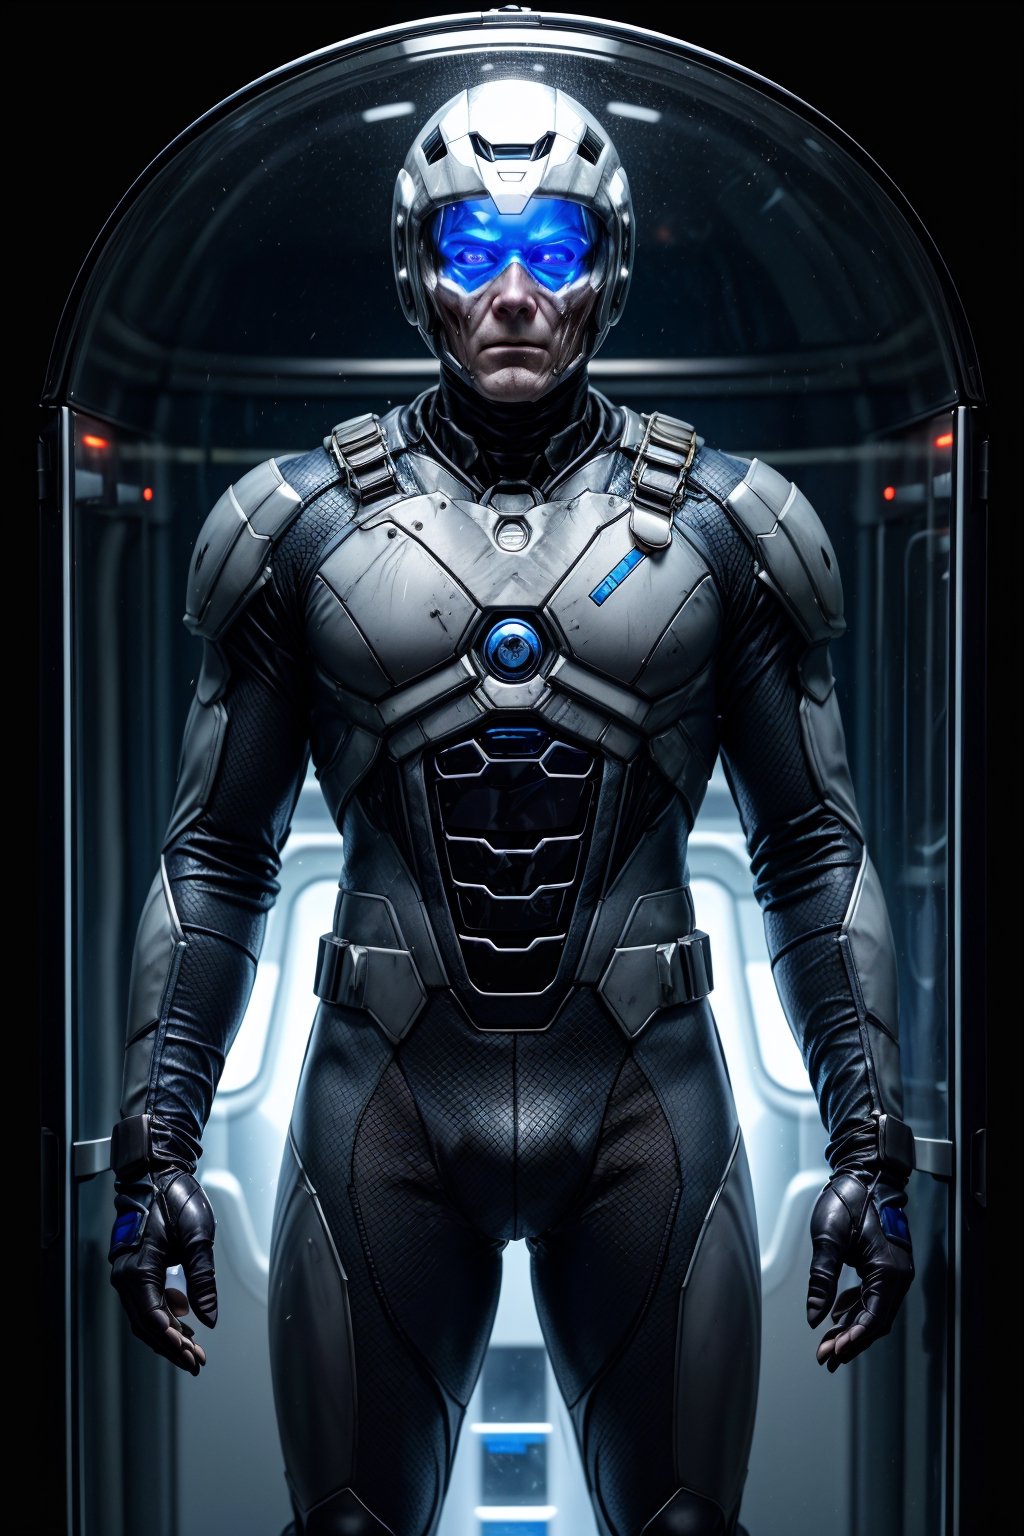 Mr. Freeze a man encased in a cryogenic suit, which sustains his life and maintains a freezing environment. The suit accompanied by a helmet with a transparent visor, revealing his cold and emotionless eyes. His skin is udepicted as pale and bluish due to his cryogenic condition.